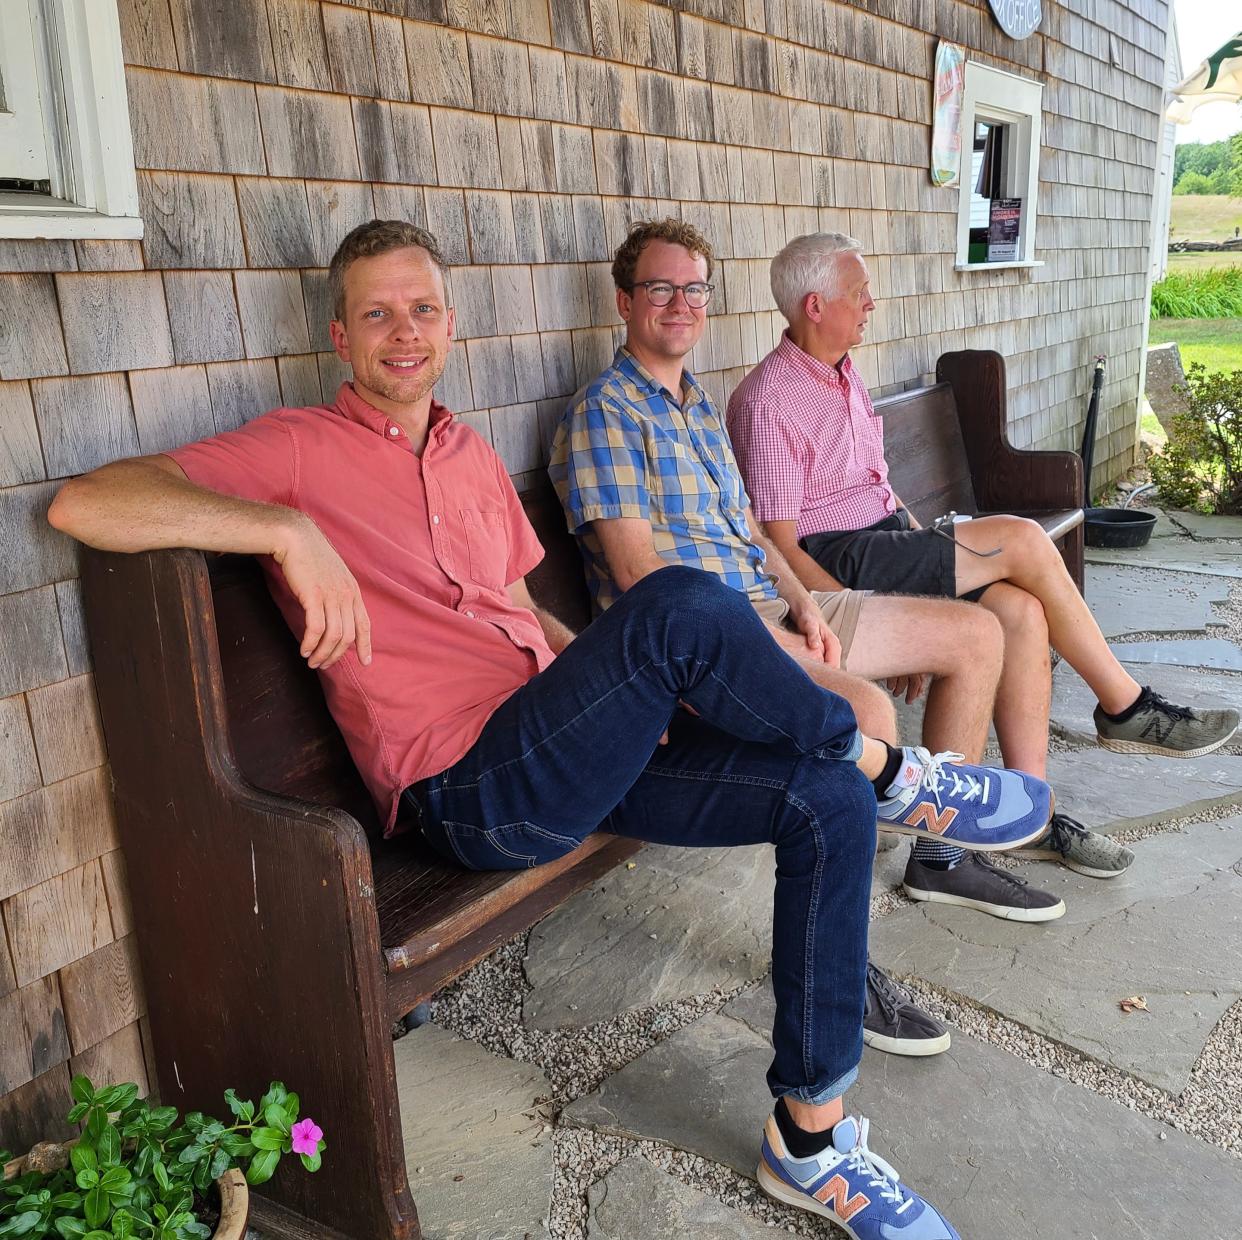 From left to right Conor Guptill, his brother Aram and their father Michael, sit outside the box office at Hackmatack Playhouse in Berwick.